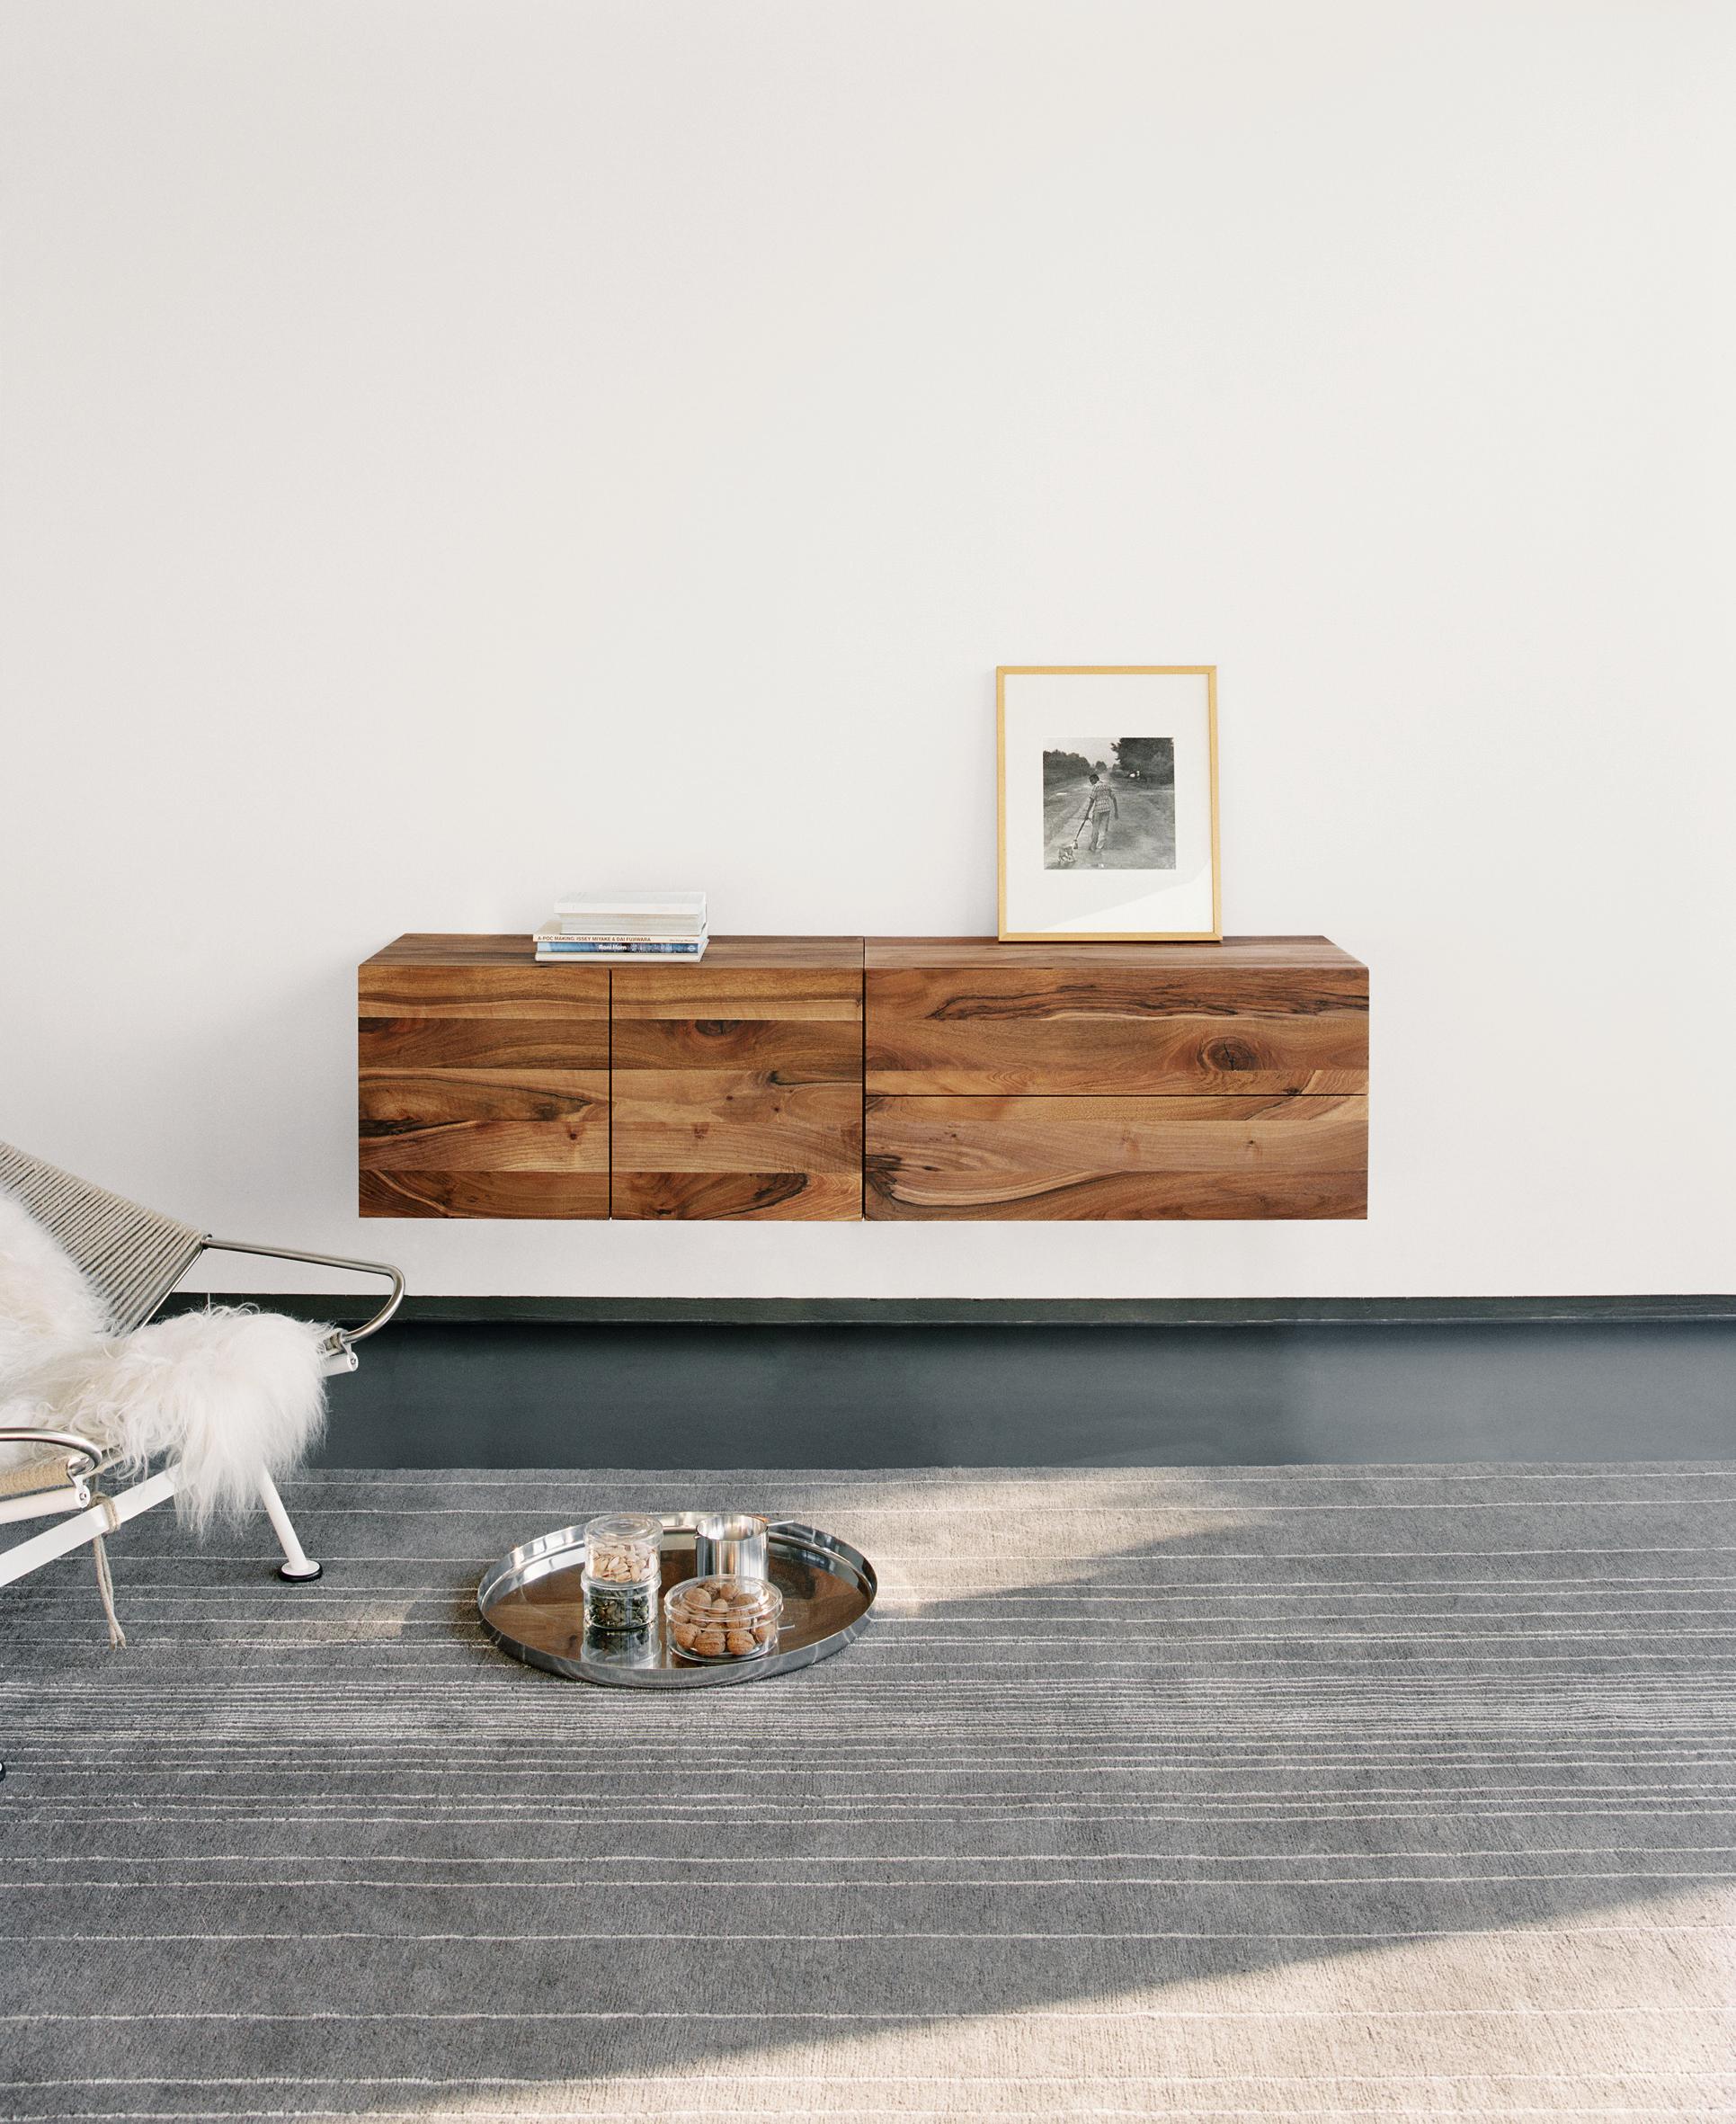 Chest of drawers Mahnaz is the wall-mounted adaption of the sideboard Fatima. Even its body is made of solid wood, the sideboard floats effortlessly. The clear design of Mahnaz benefits from a concept that eliminates visible frames and excludes all